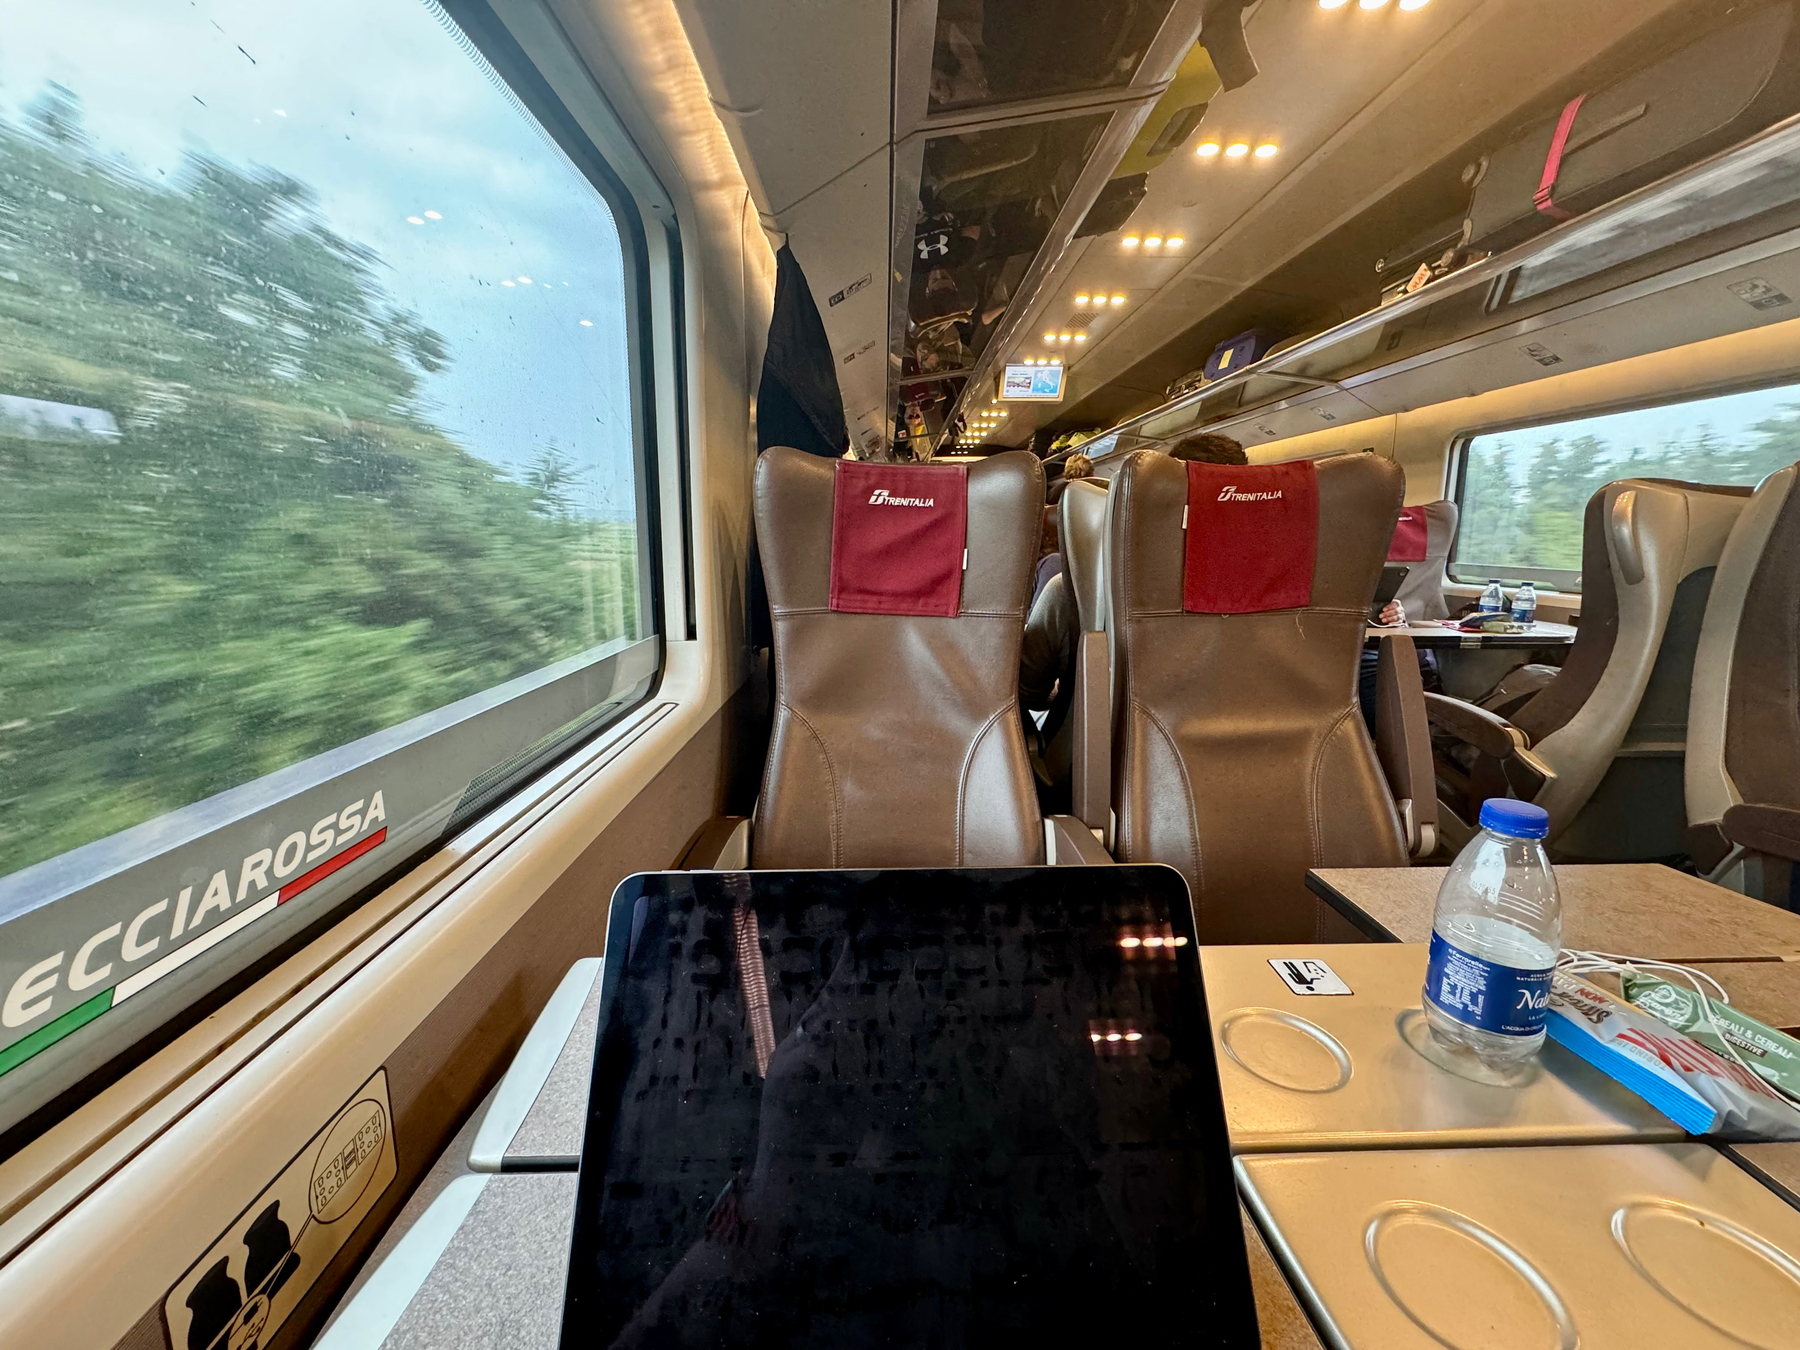 Interior of a high-speed train, specifically a Frecciarossa train by Trenitalia. The image shows rows of seats with red headrest covers, a table with a water bottle, and an electronic device. The train window displays blurred greenery outside. 